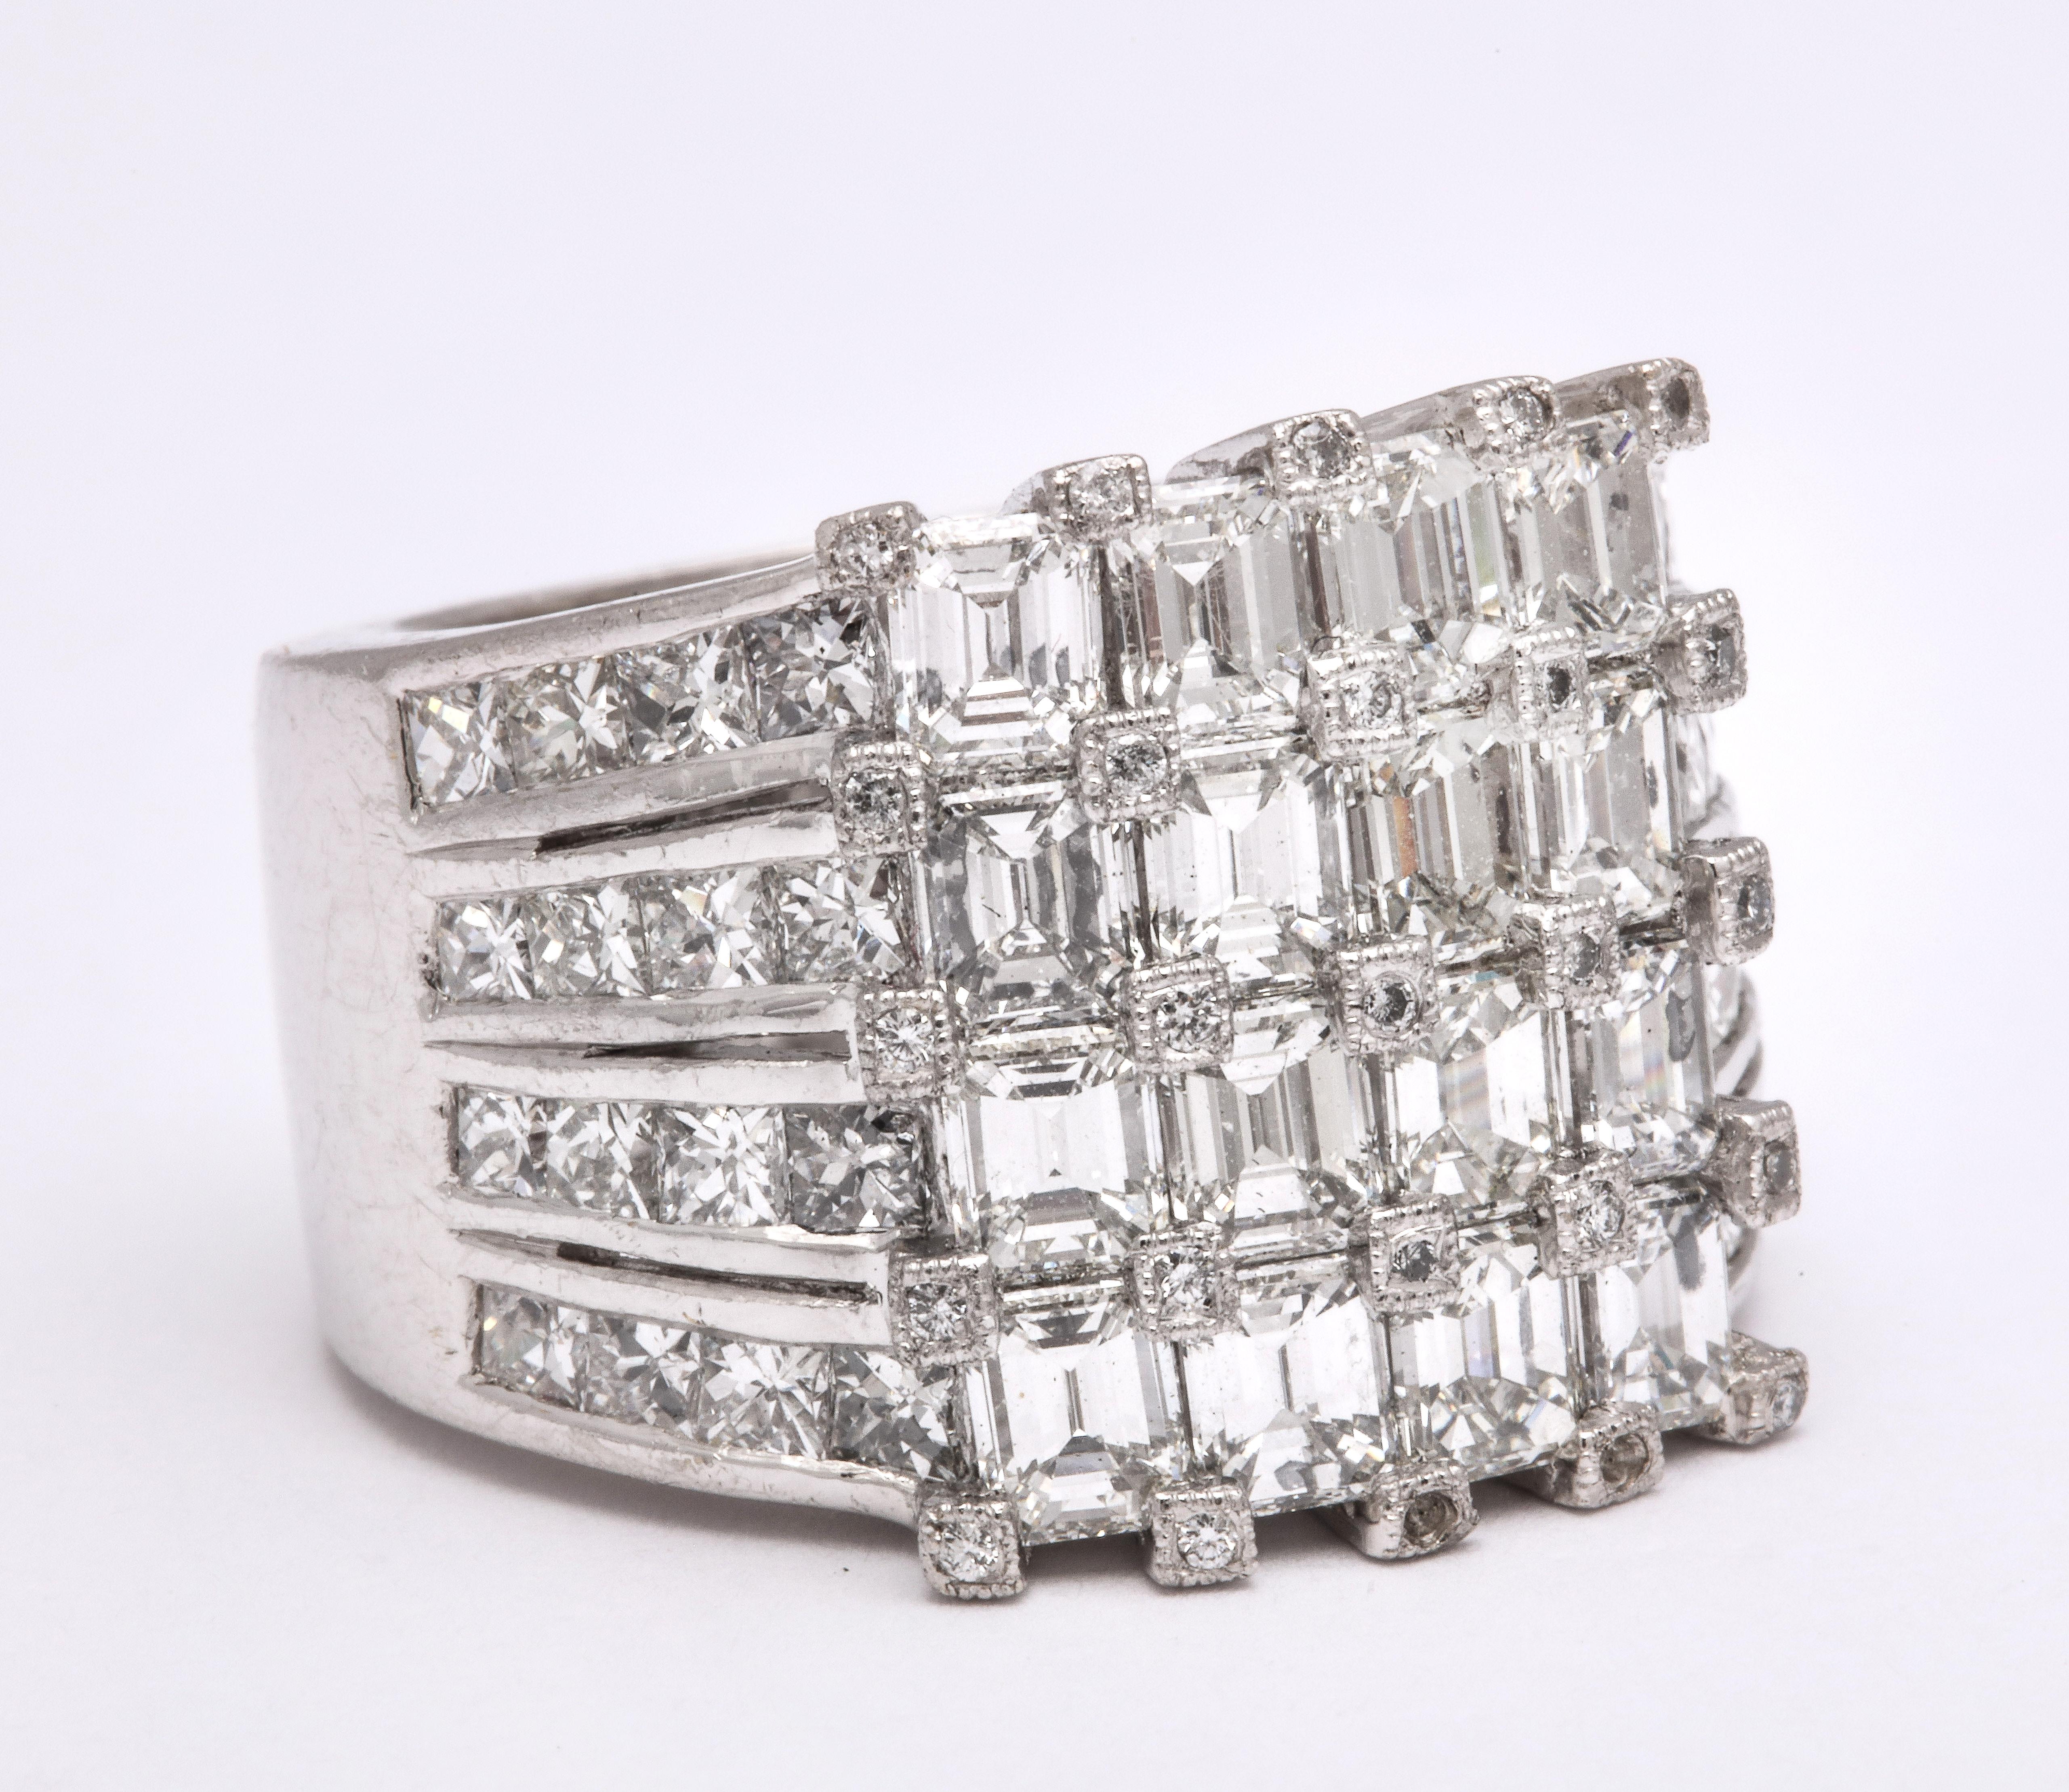 
A FABULOUS PIECE! 

7.18 carats of white Emerald cut and channel set Princess cut diamonds set in platinum. 

Small white round brilliant cut diamonds cover each prong -- tons of sparkle in a unique design!

Currently a size 7.5, this ring is